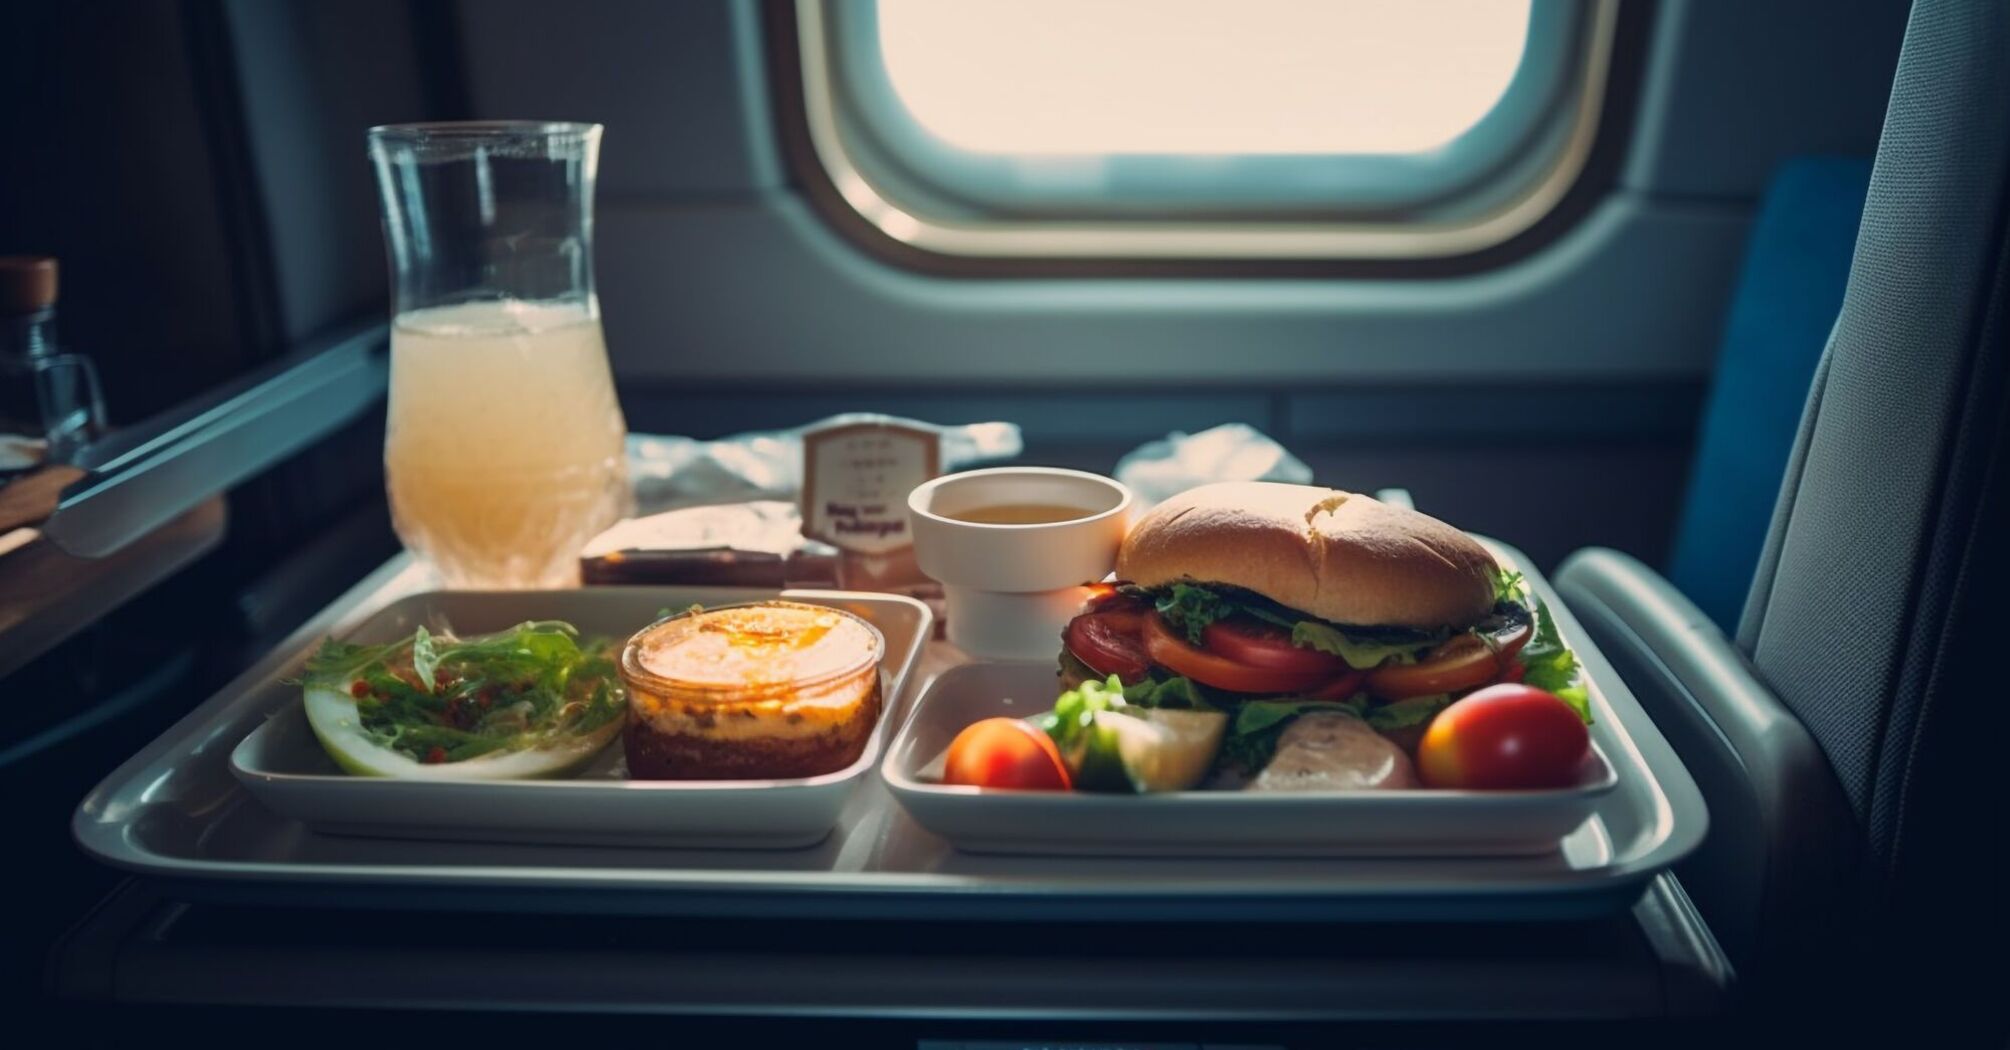 Long and not hungry flight: what food should be chosen during the flight